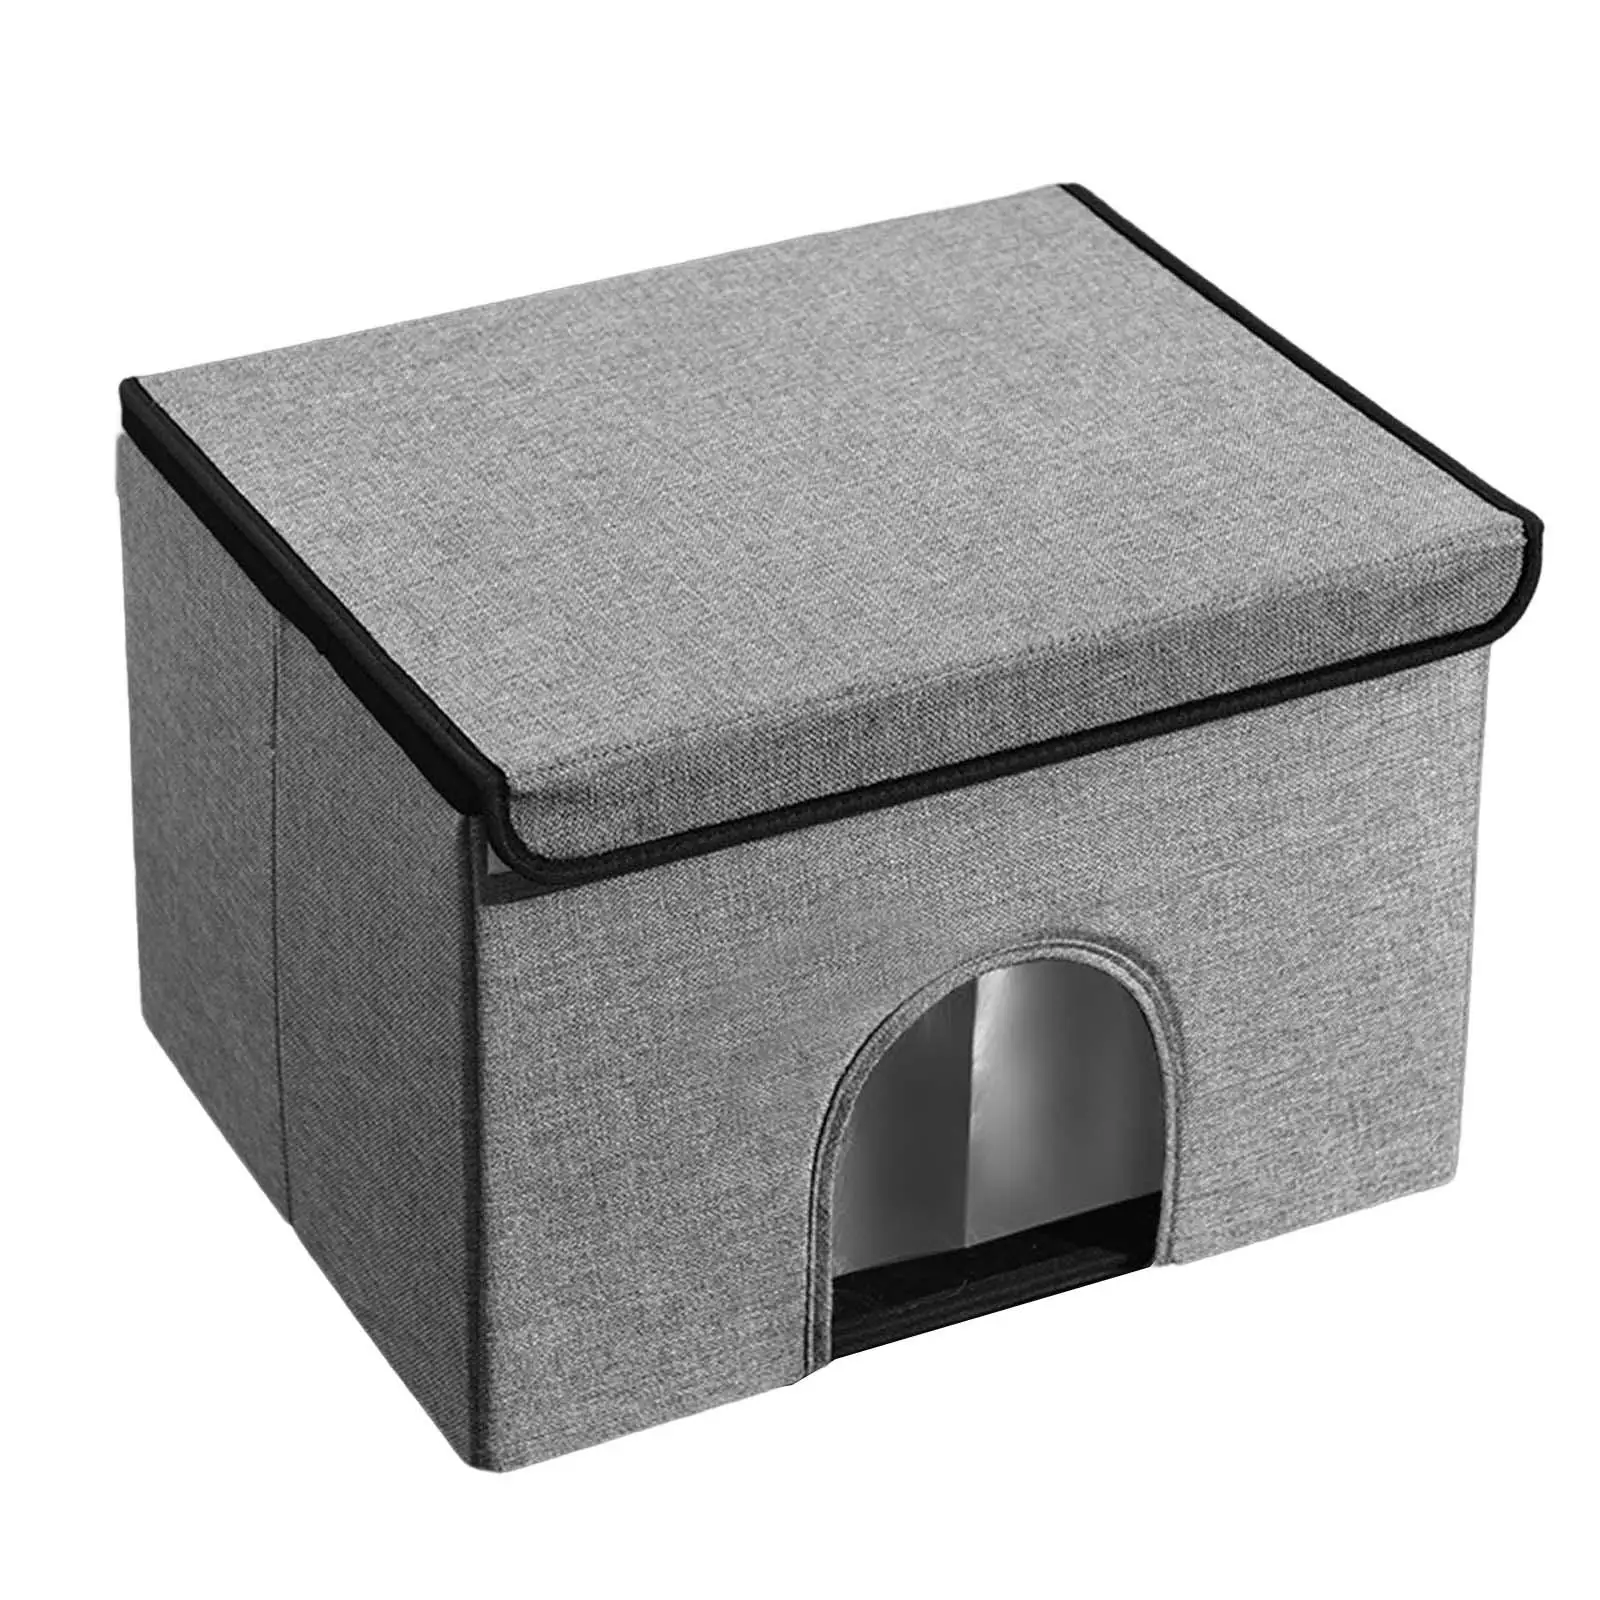 Summer Cooling Cat House Cat Bed with Freezer Packs Internal Aluminum Foil Layer Versatile 19.7x15.7x13.8inch for Small Animals